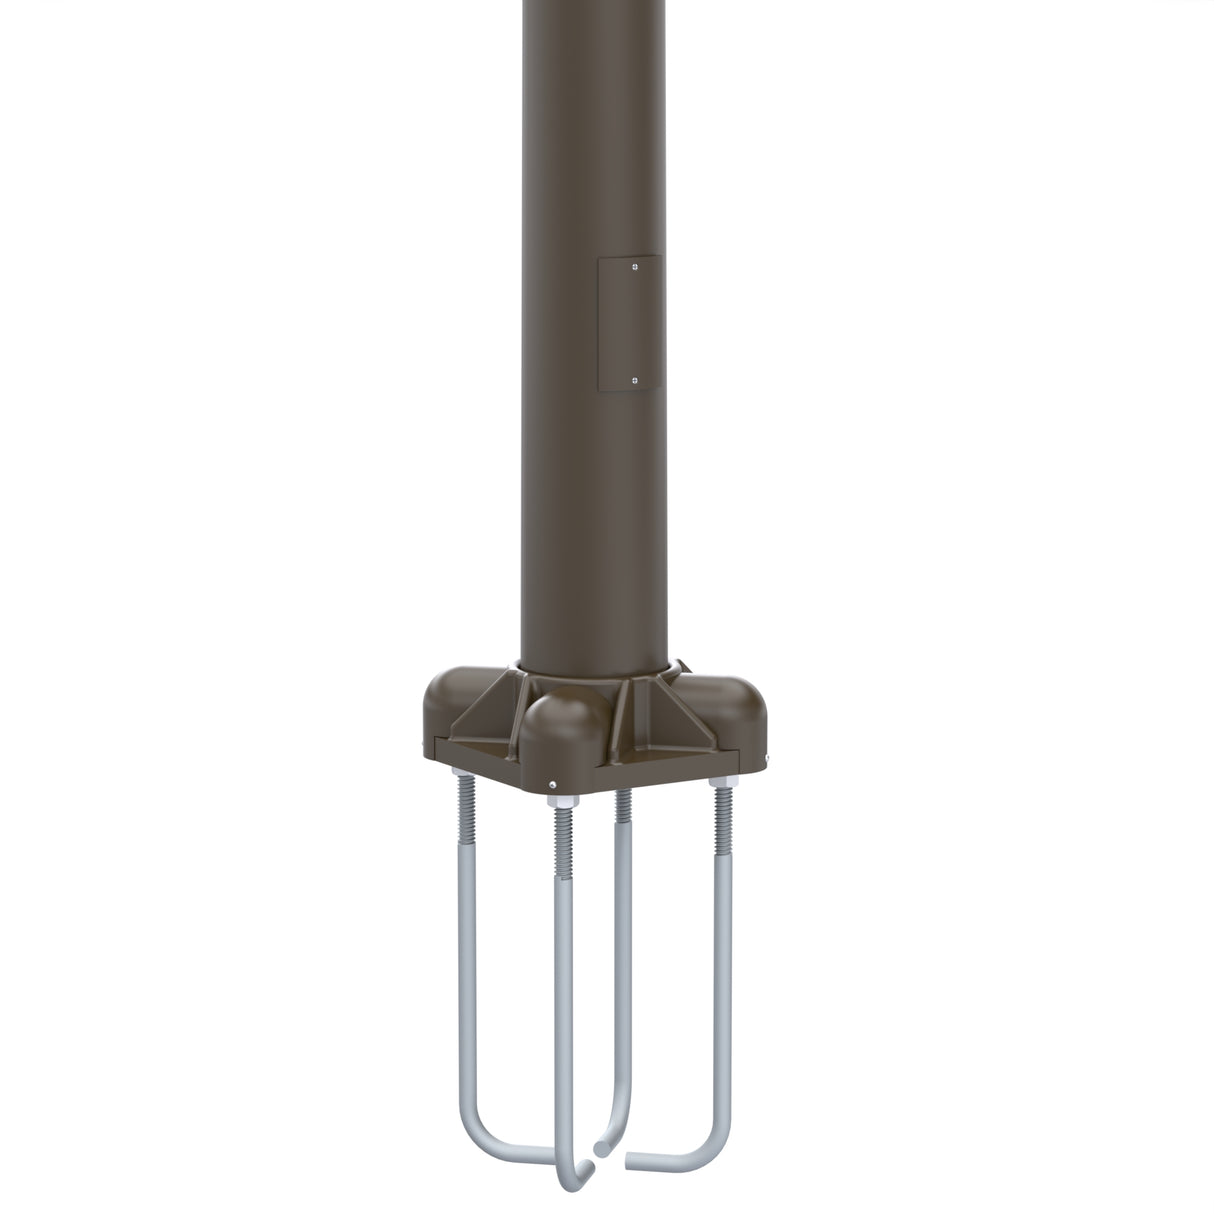 40' Tall x 8.0" Base OD x 4.5" Top OD x 0.156" Thick, Round Tapered Aluminum, Anchor Base Light Pole with 8' Davit Arm